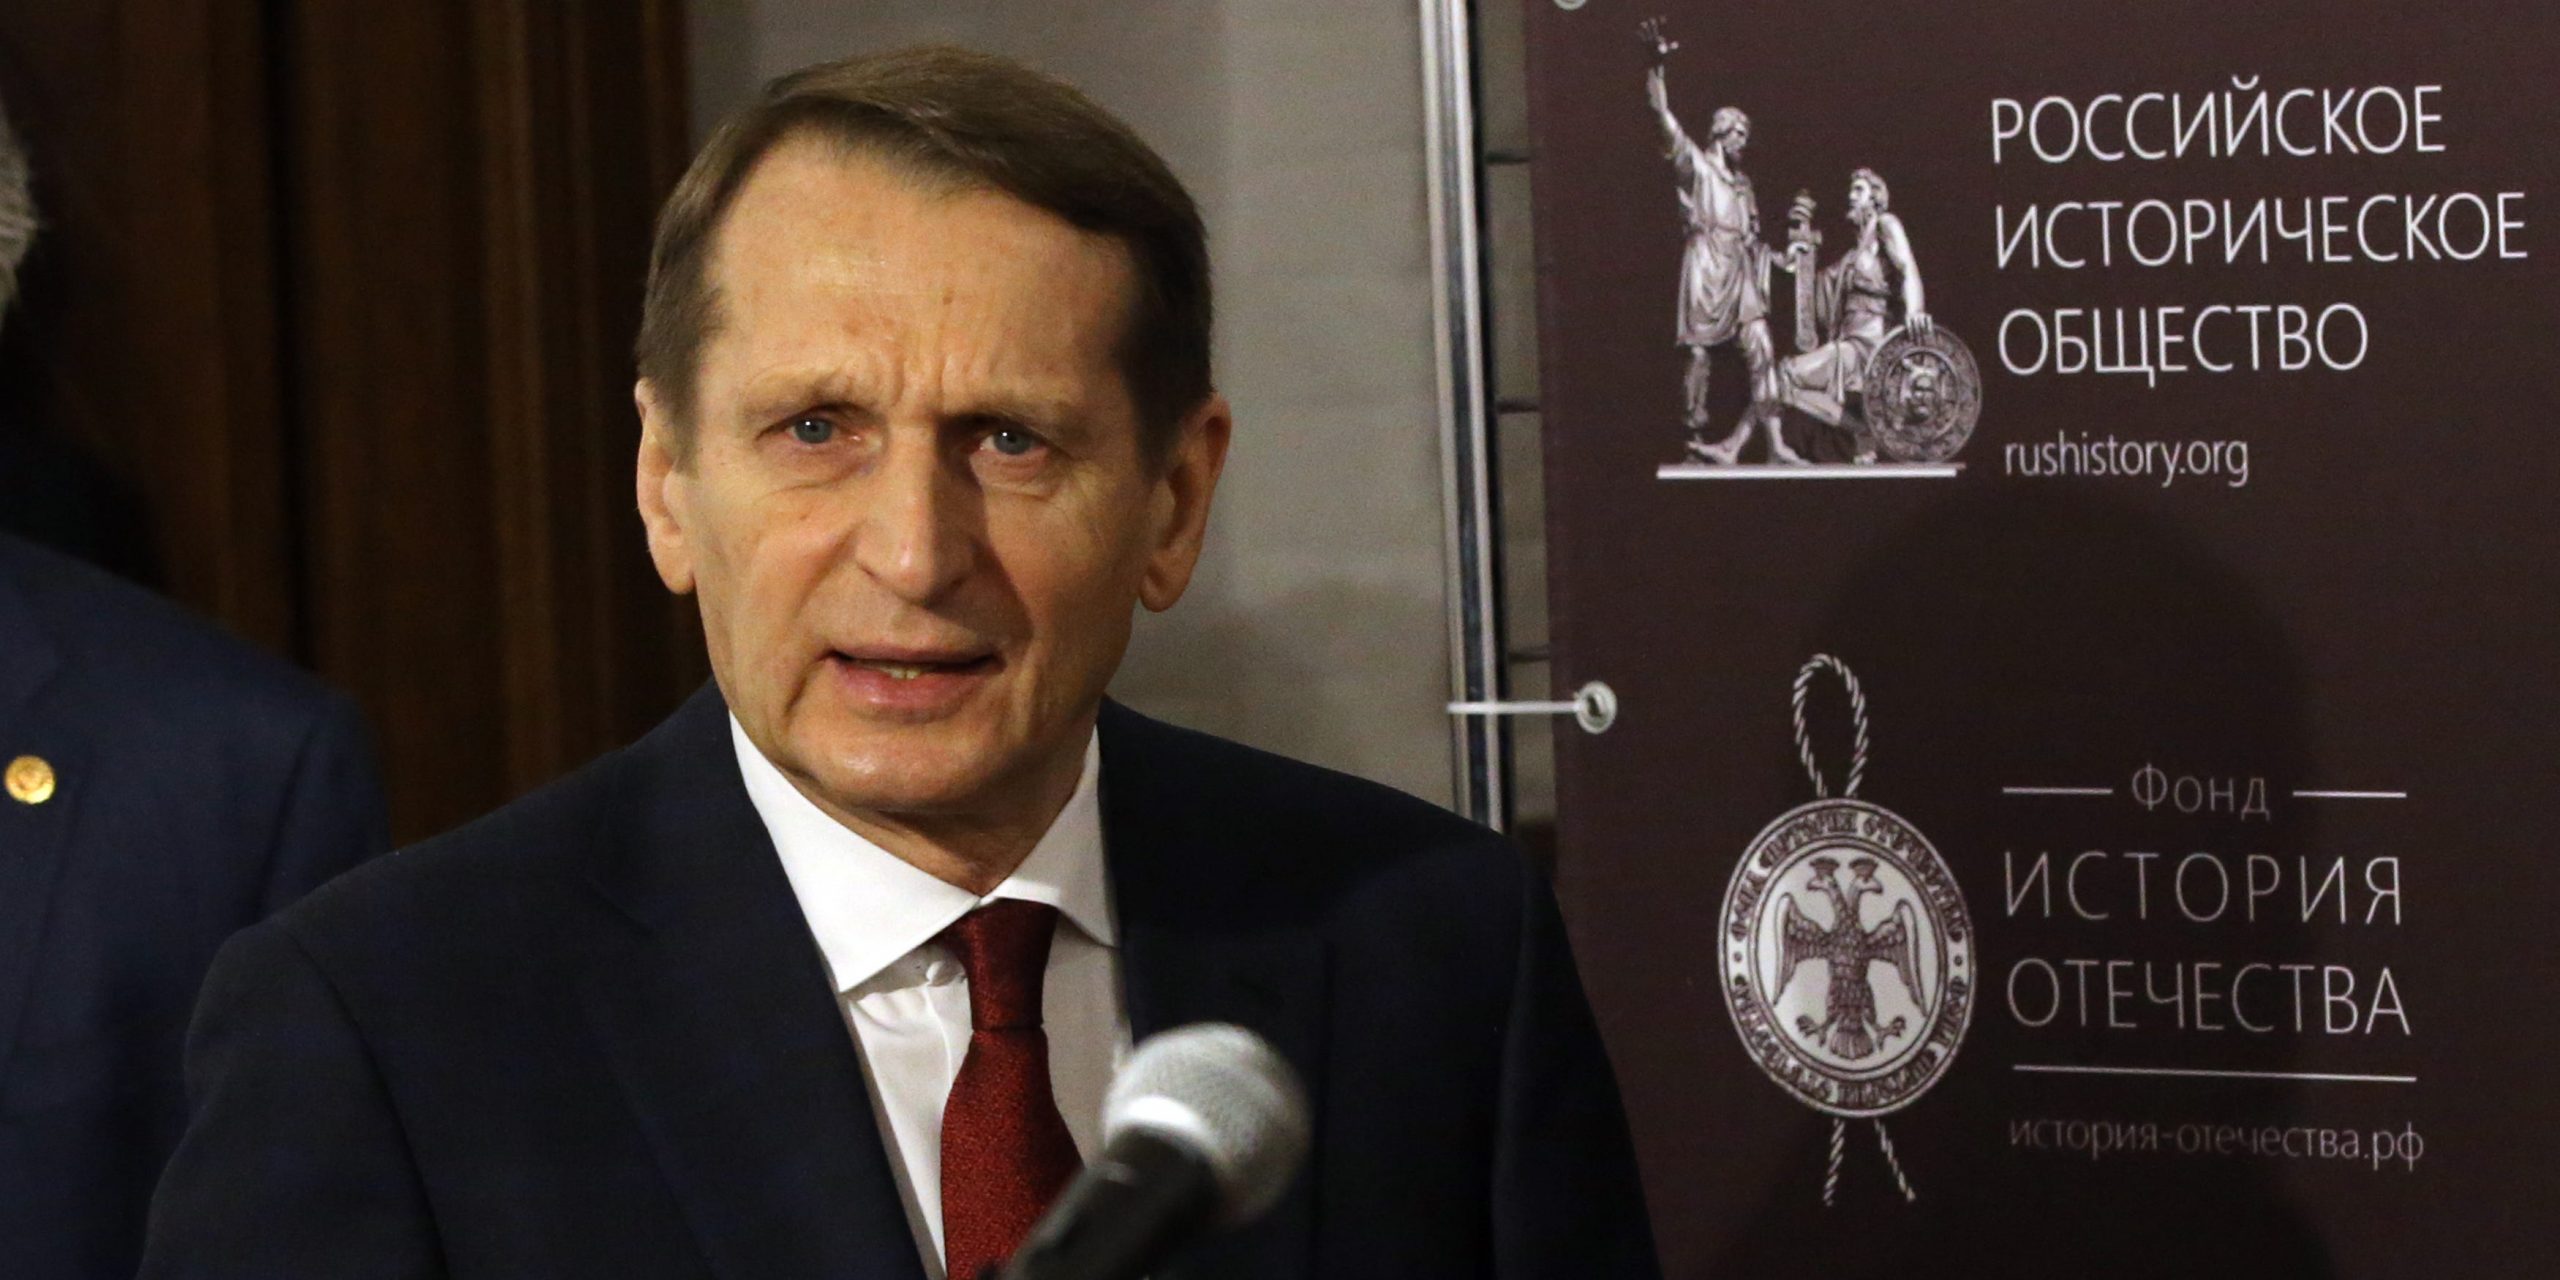 Russian Foreign Intelligence Service (SVR) Director Sergei Naryshkin is seen while opening of the exhibition on violations of human rights in Ukraine (2017-2020), on January 18, 2022 in Moscow, Russia.